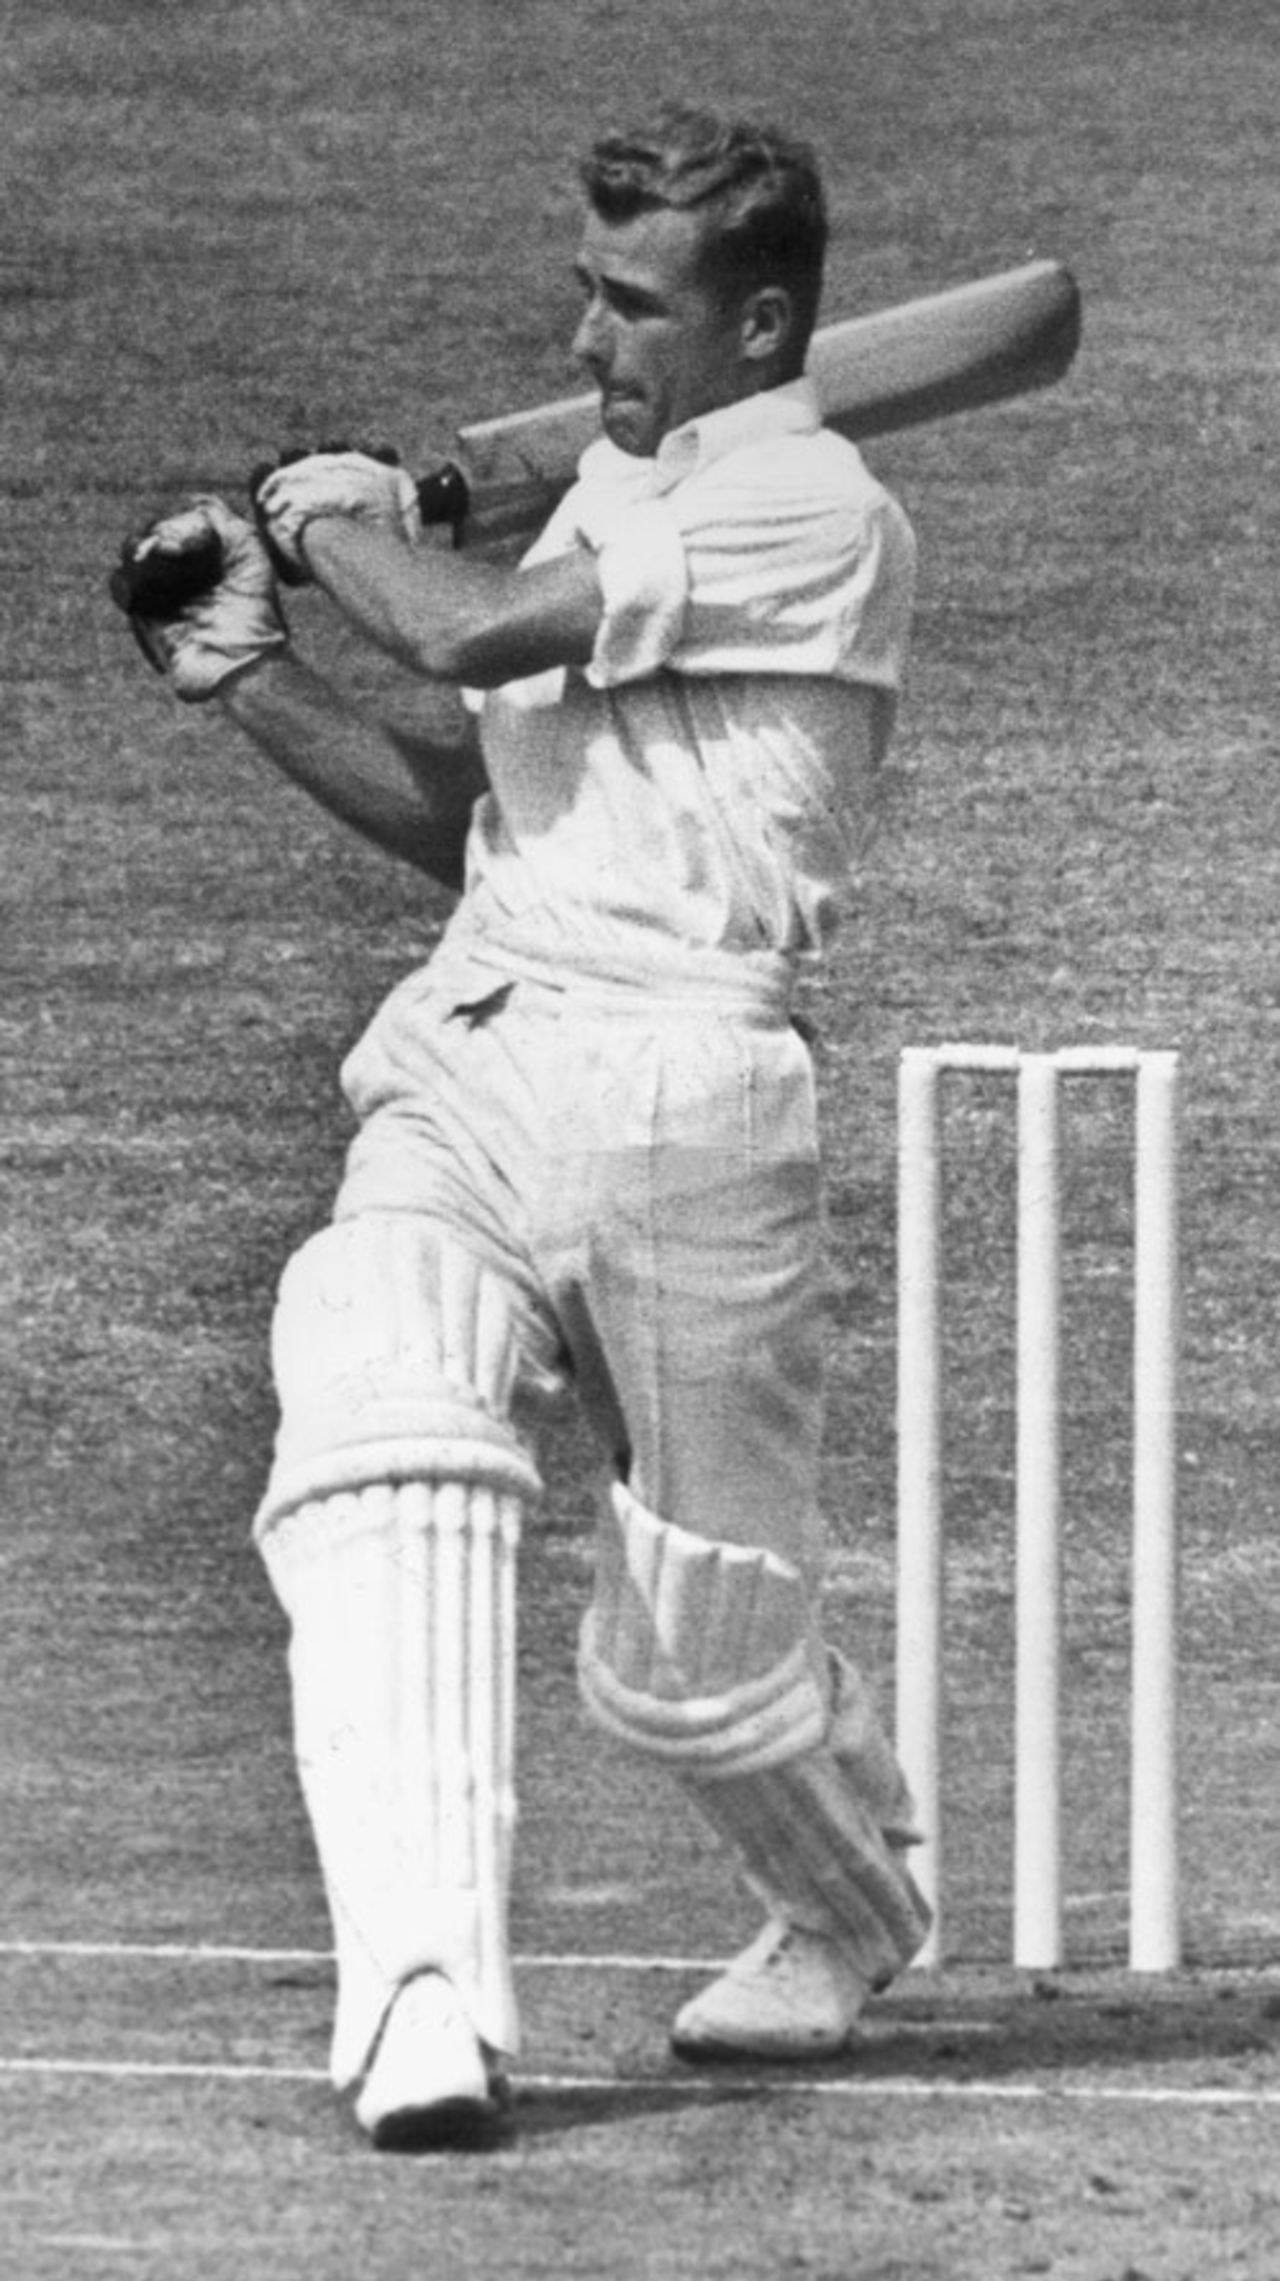 Bert Sutcliffe on the attack, England v New Zealand, 4th Test, The Oval, August 13, 1949